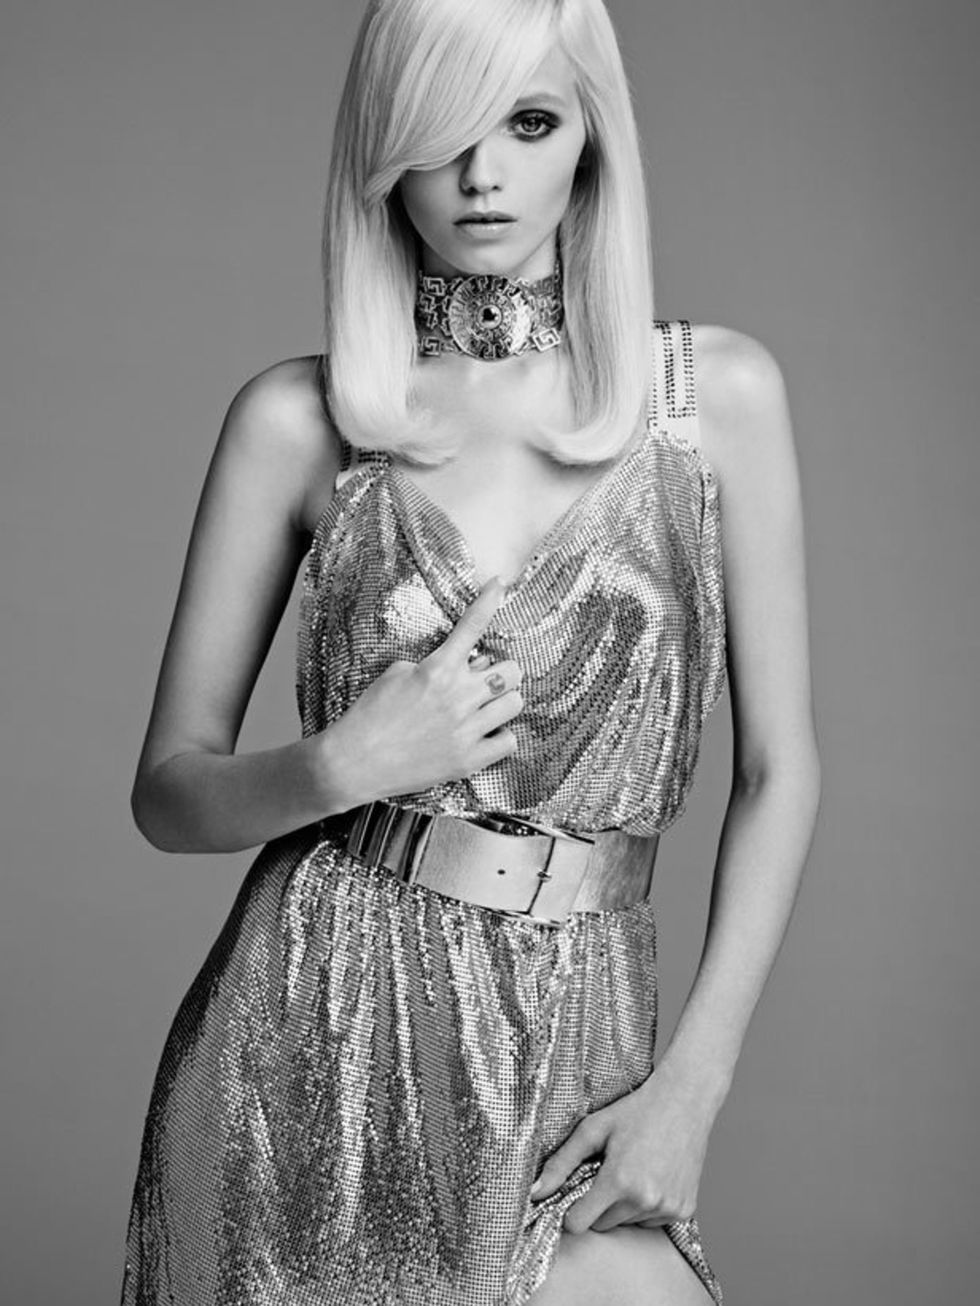 <p>Model <a href="http://www.elleuk.com/content/search?SearchText=Abbey+Lee+Kershaw&amp;SearchButton=Search">Abbey Lee Kershaw</a> wears a metallic dress in the <a href="http://www.elleuk.com/catwalk/collections/versace/">Versace</a> for <a href="http://w